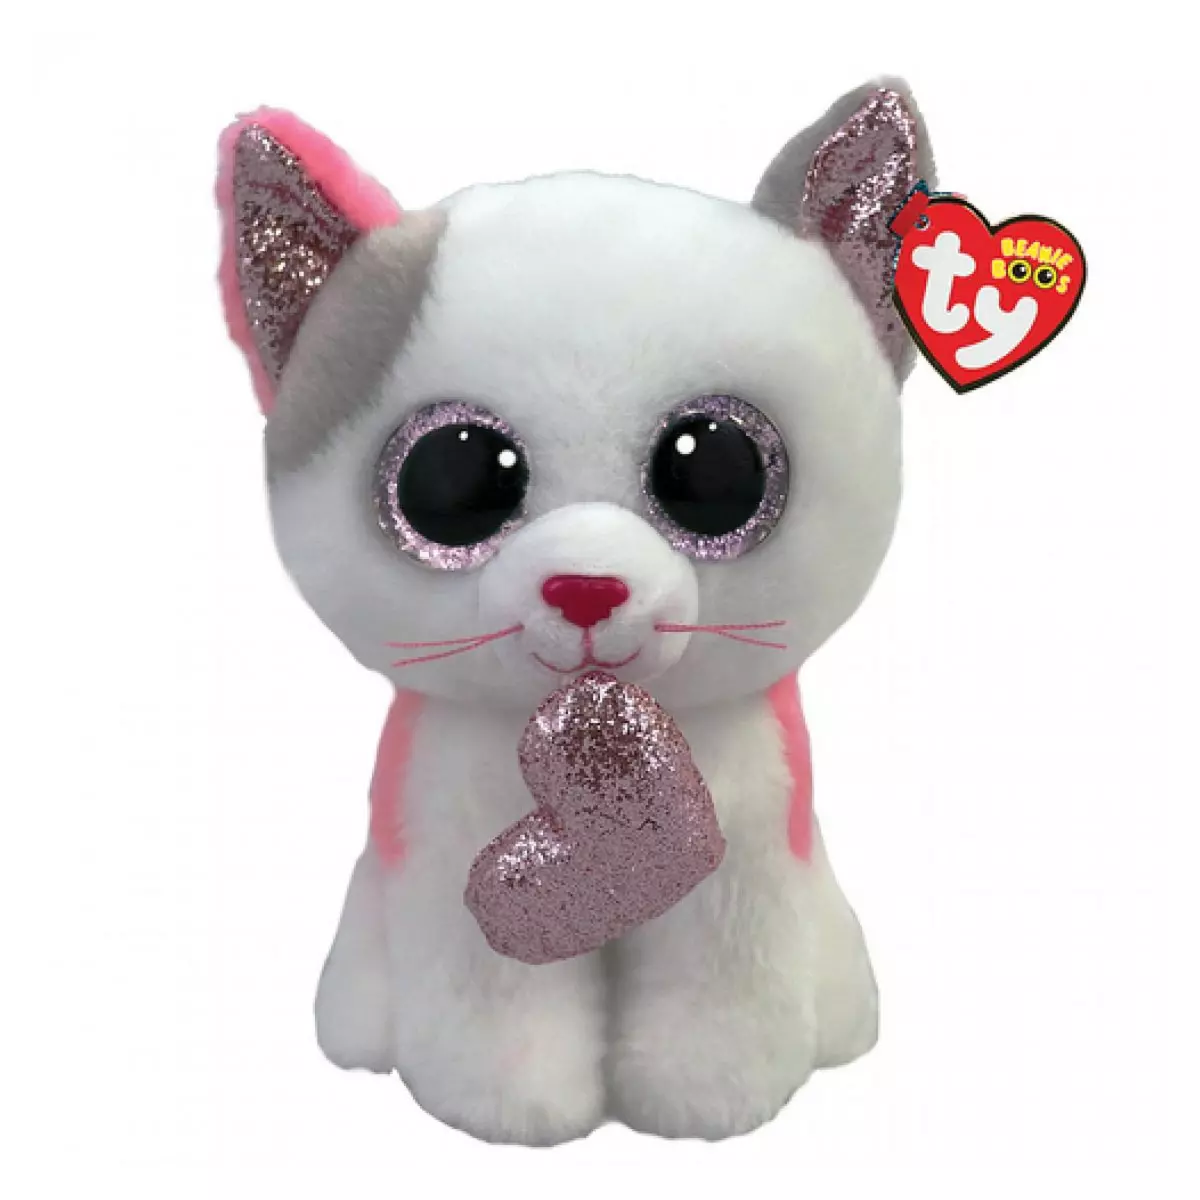 Ty Beanie Boo s Small - Milena le chat